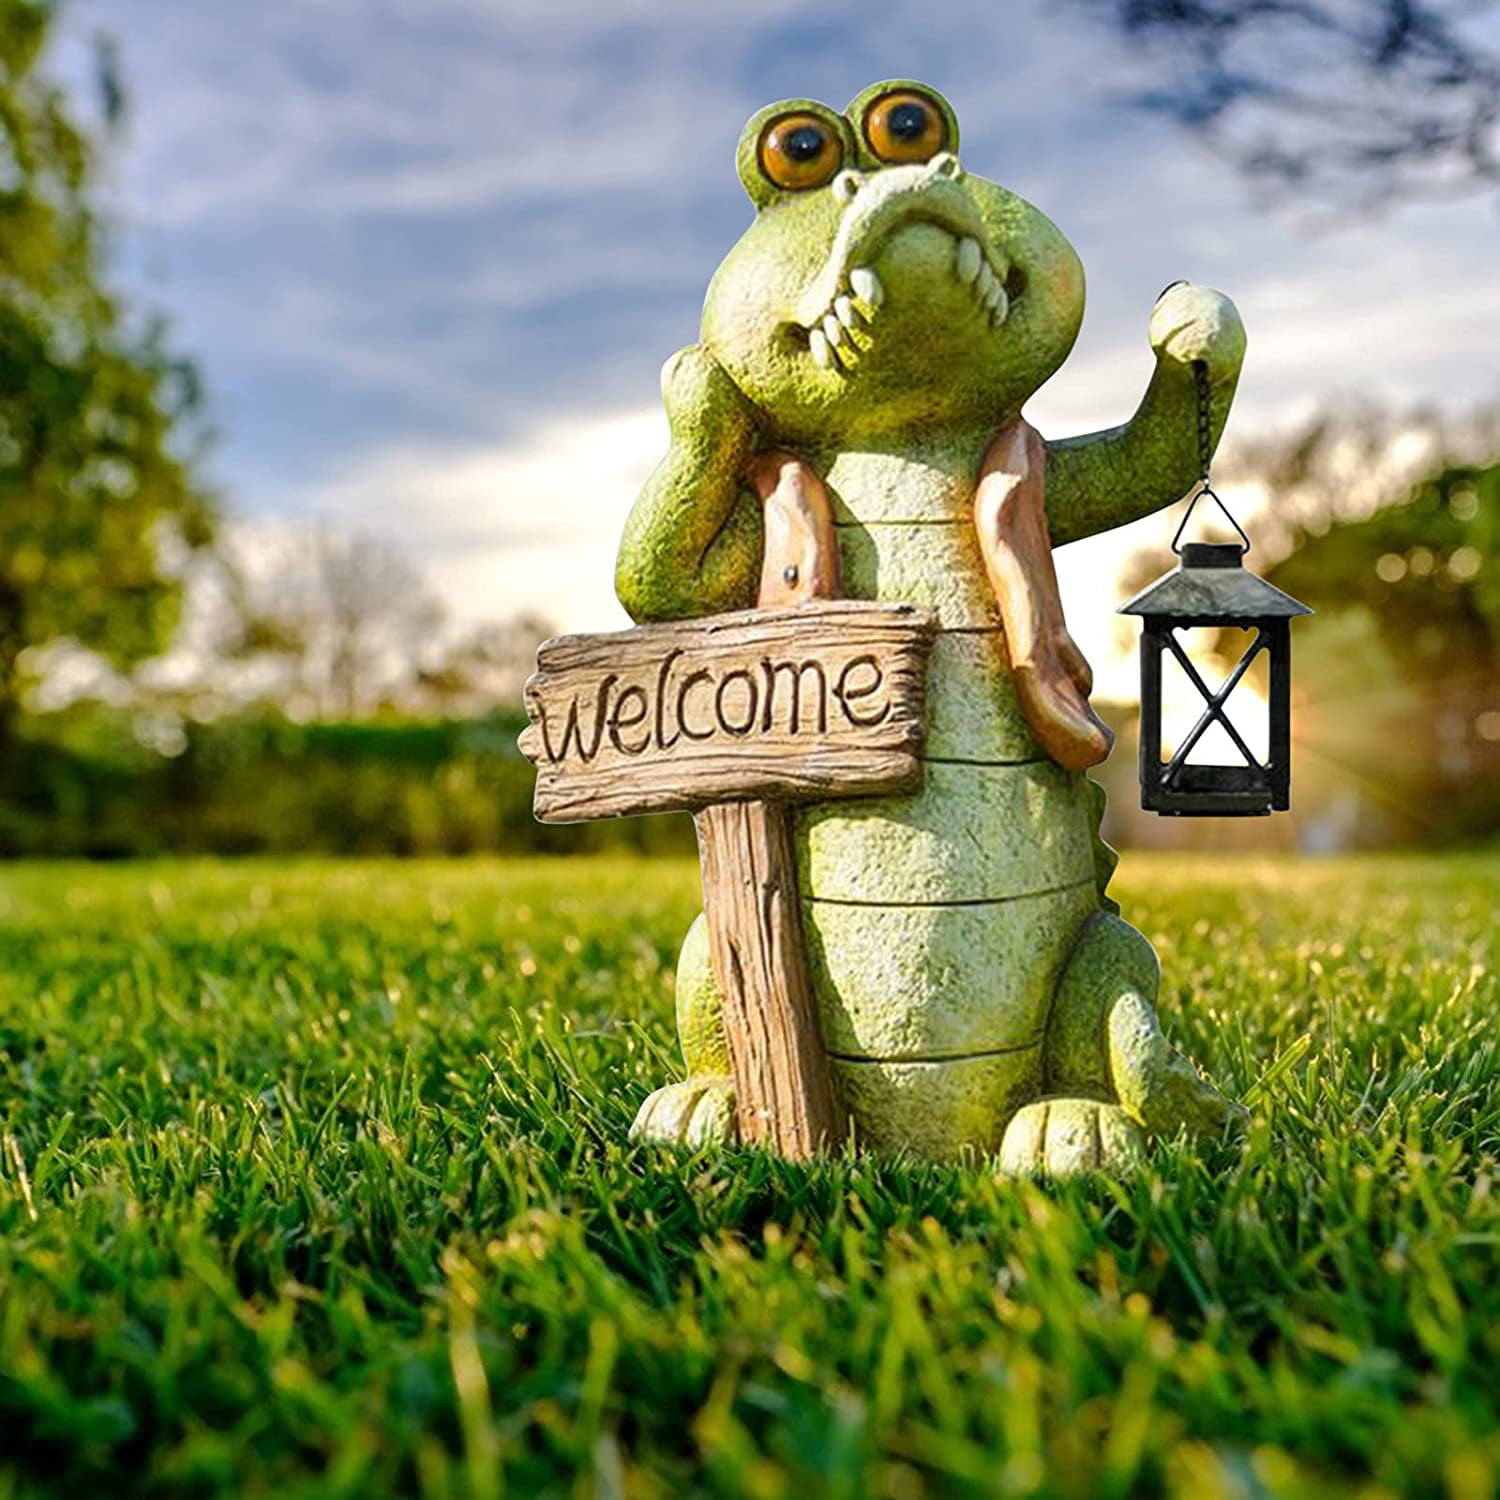 11" L FROG WELCOME SIGN HOME GARDEN POOL YARD PATIO DECOR BRAND NEW 